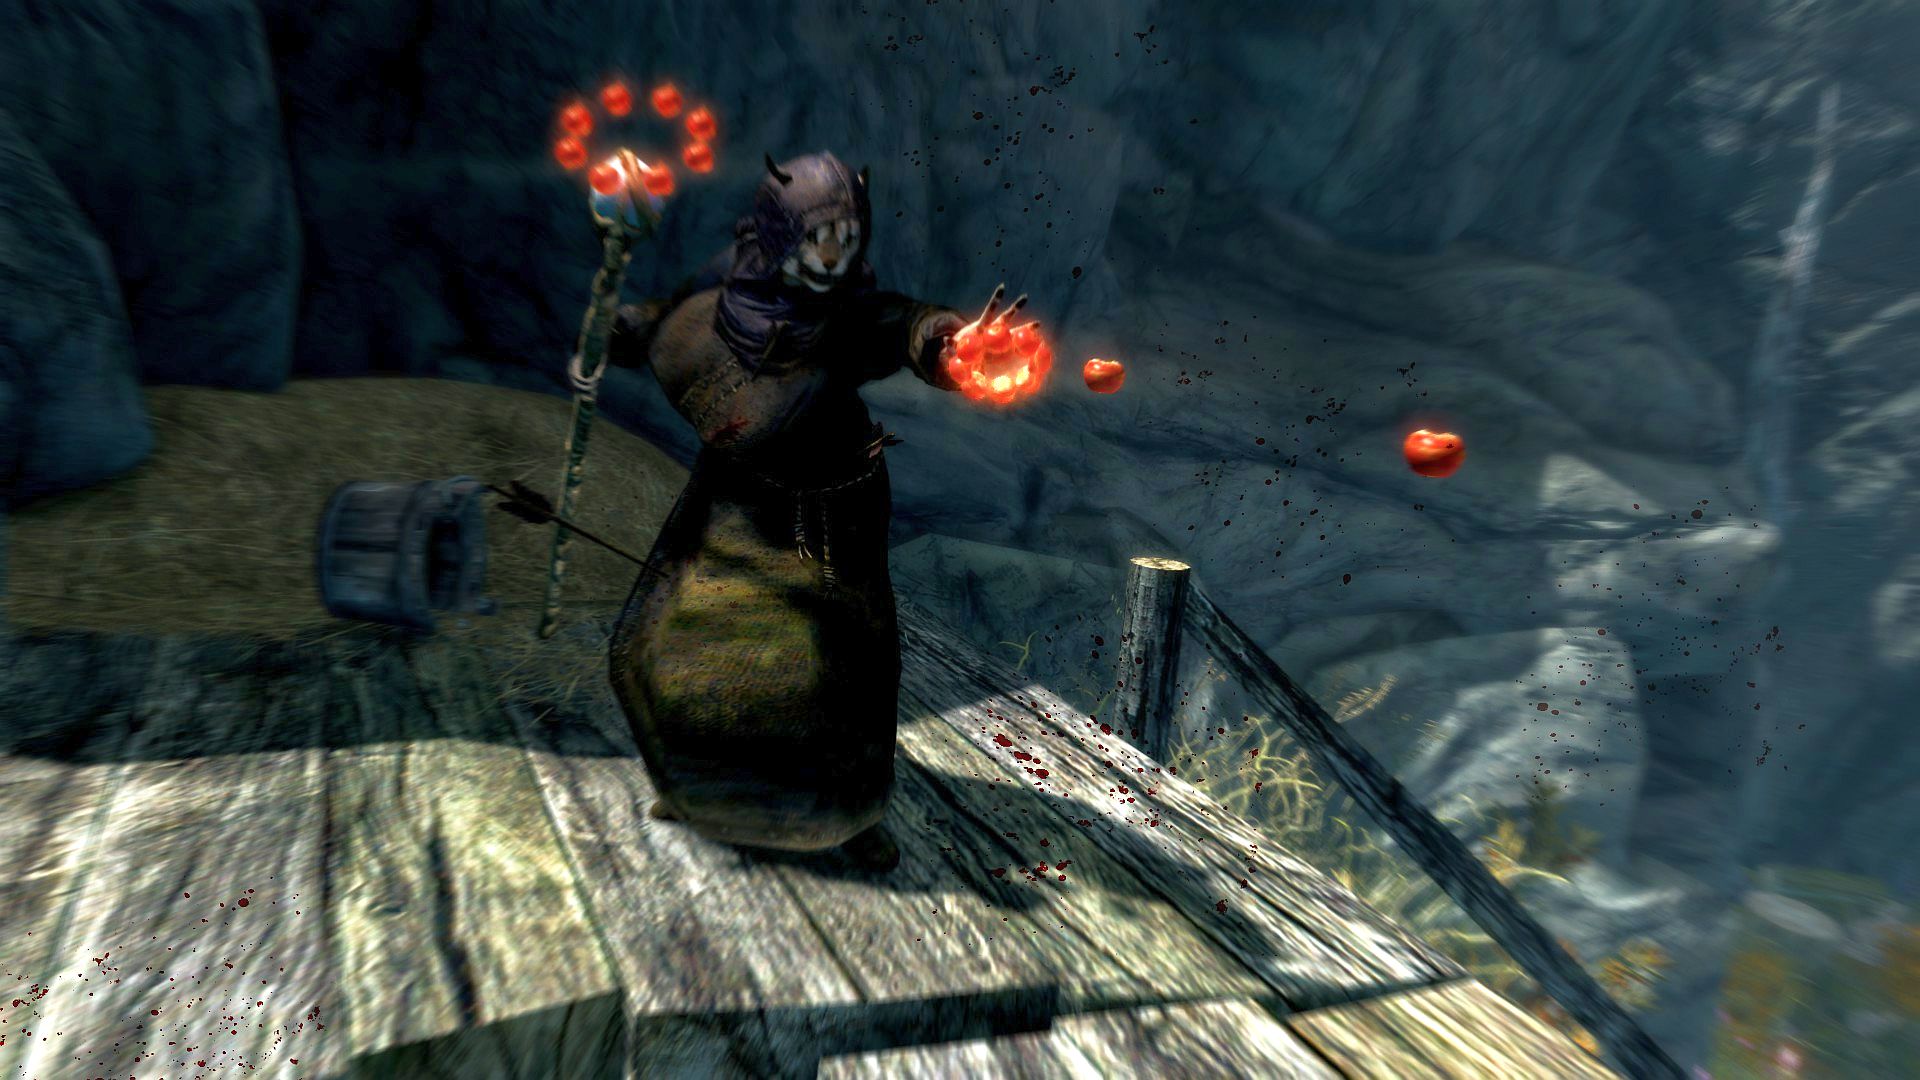 This Skyrim mod lets you unleash the full power of the mighty tomato